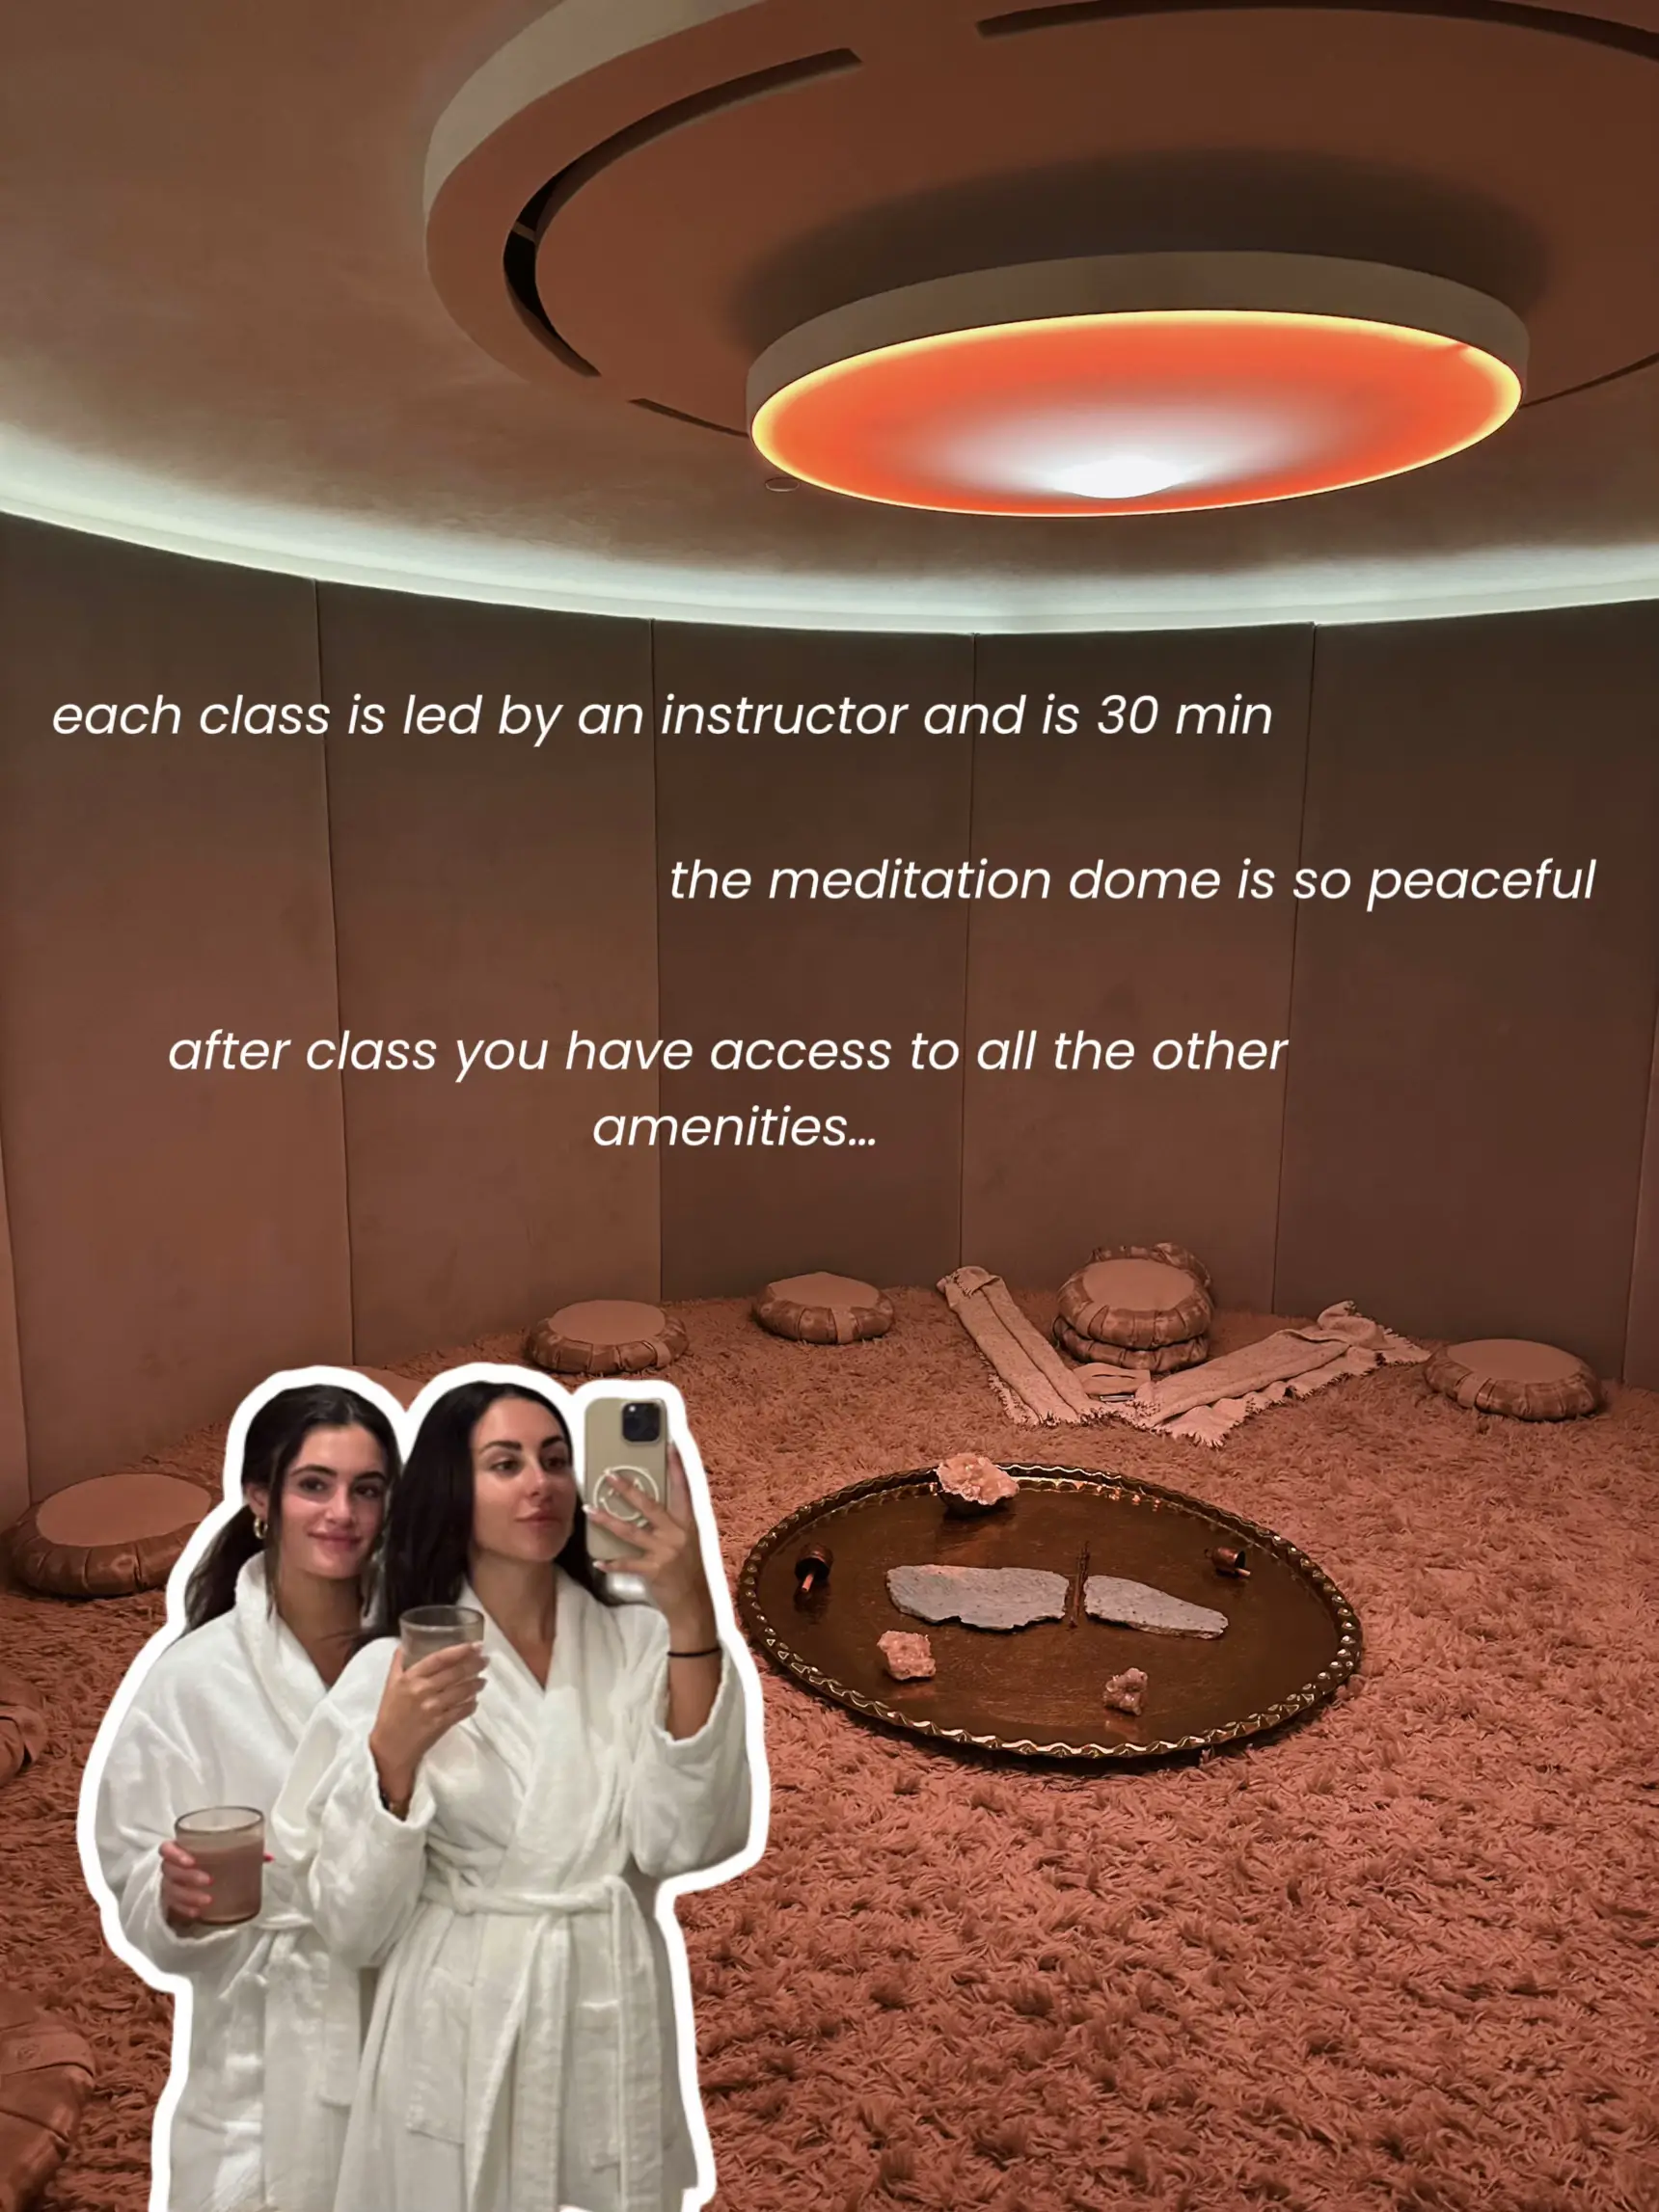  Two women are taking a selfie in a room with a dome.